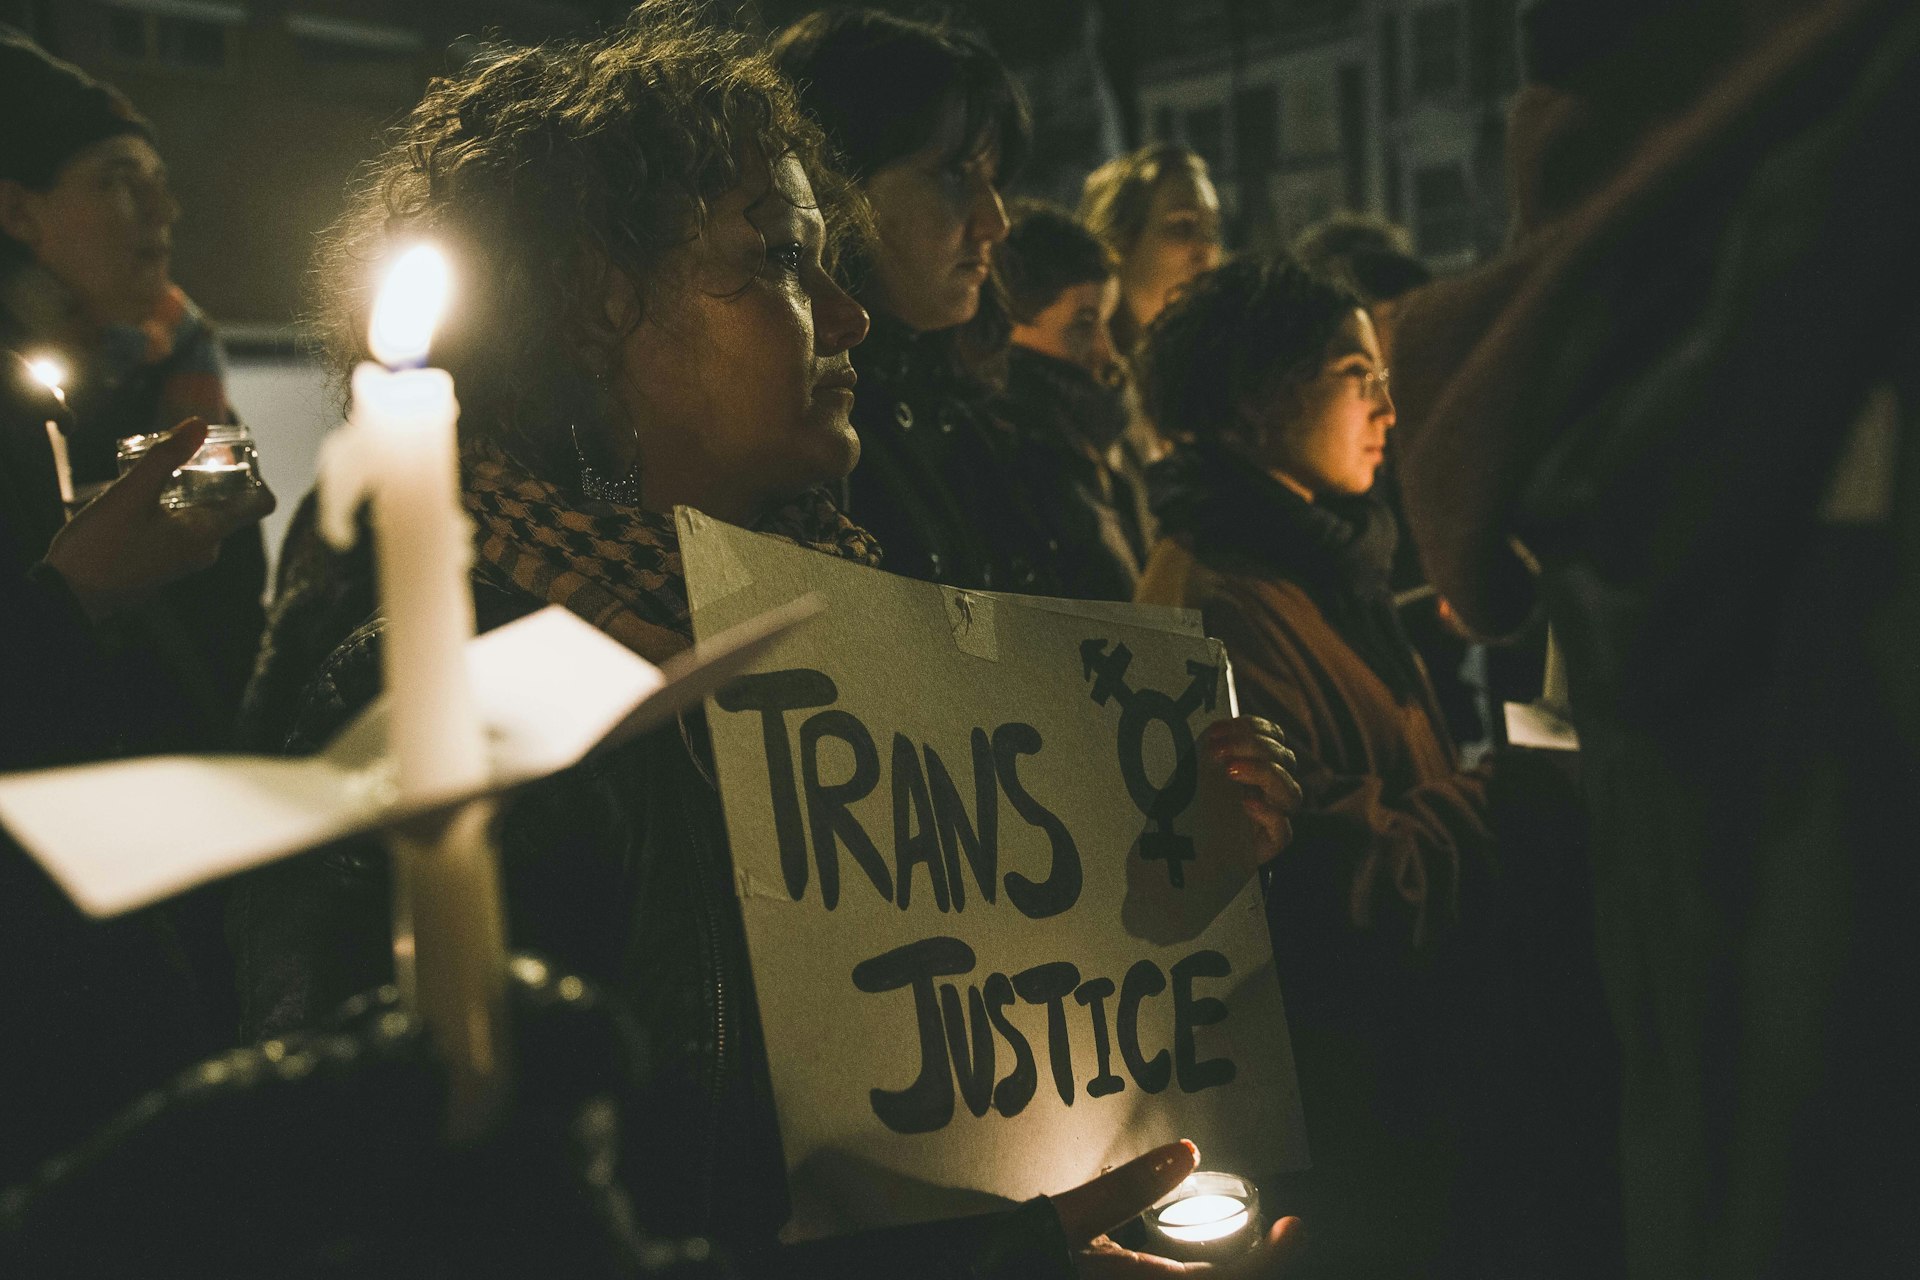 Transgender prisoners are being failed by the system